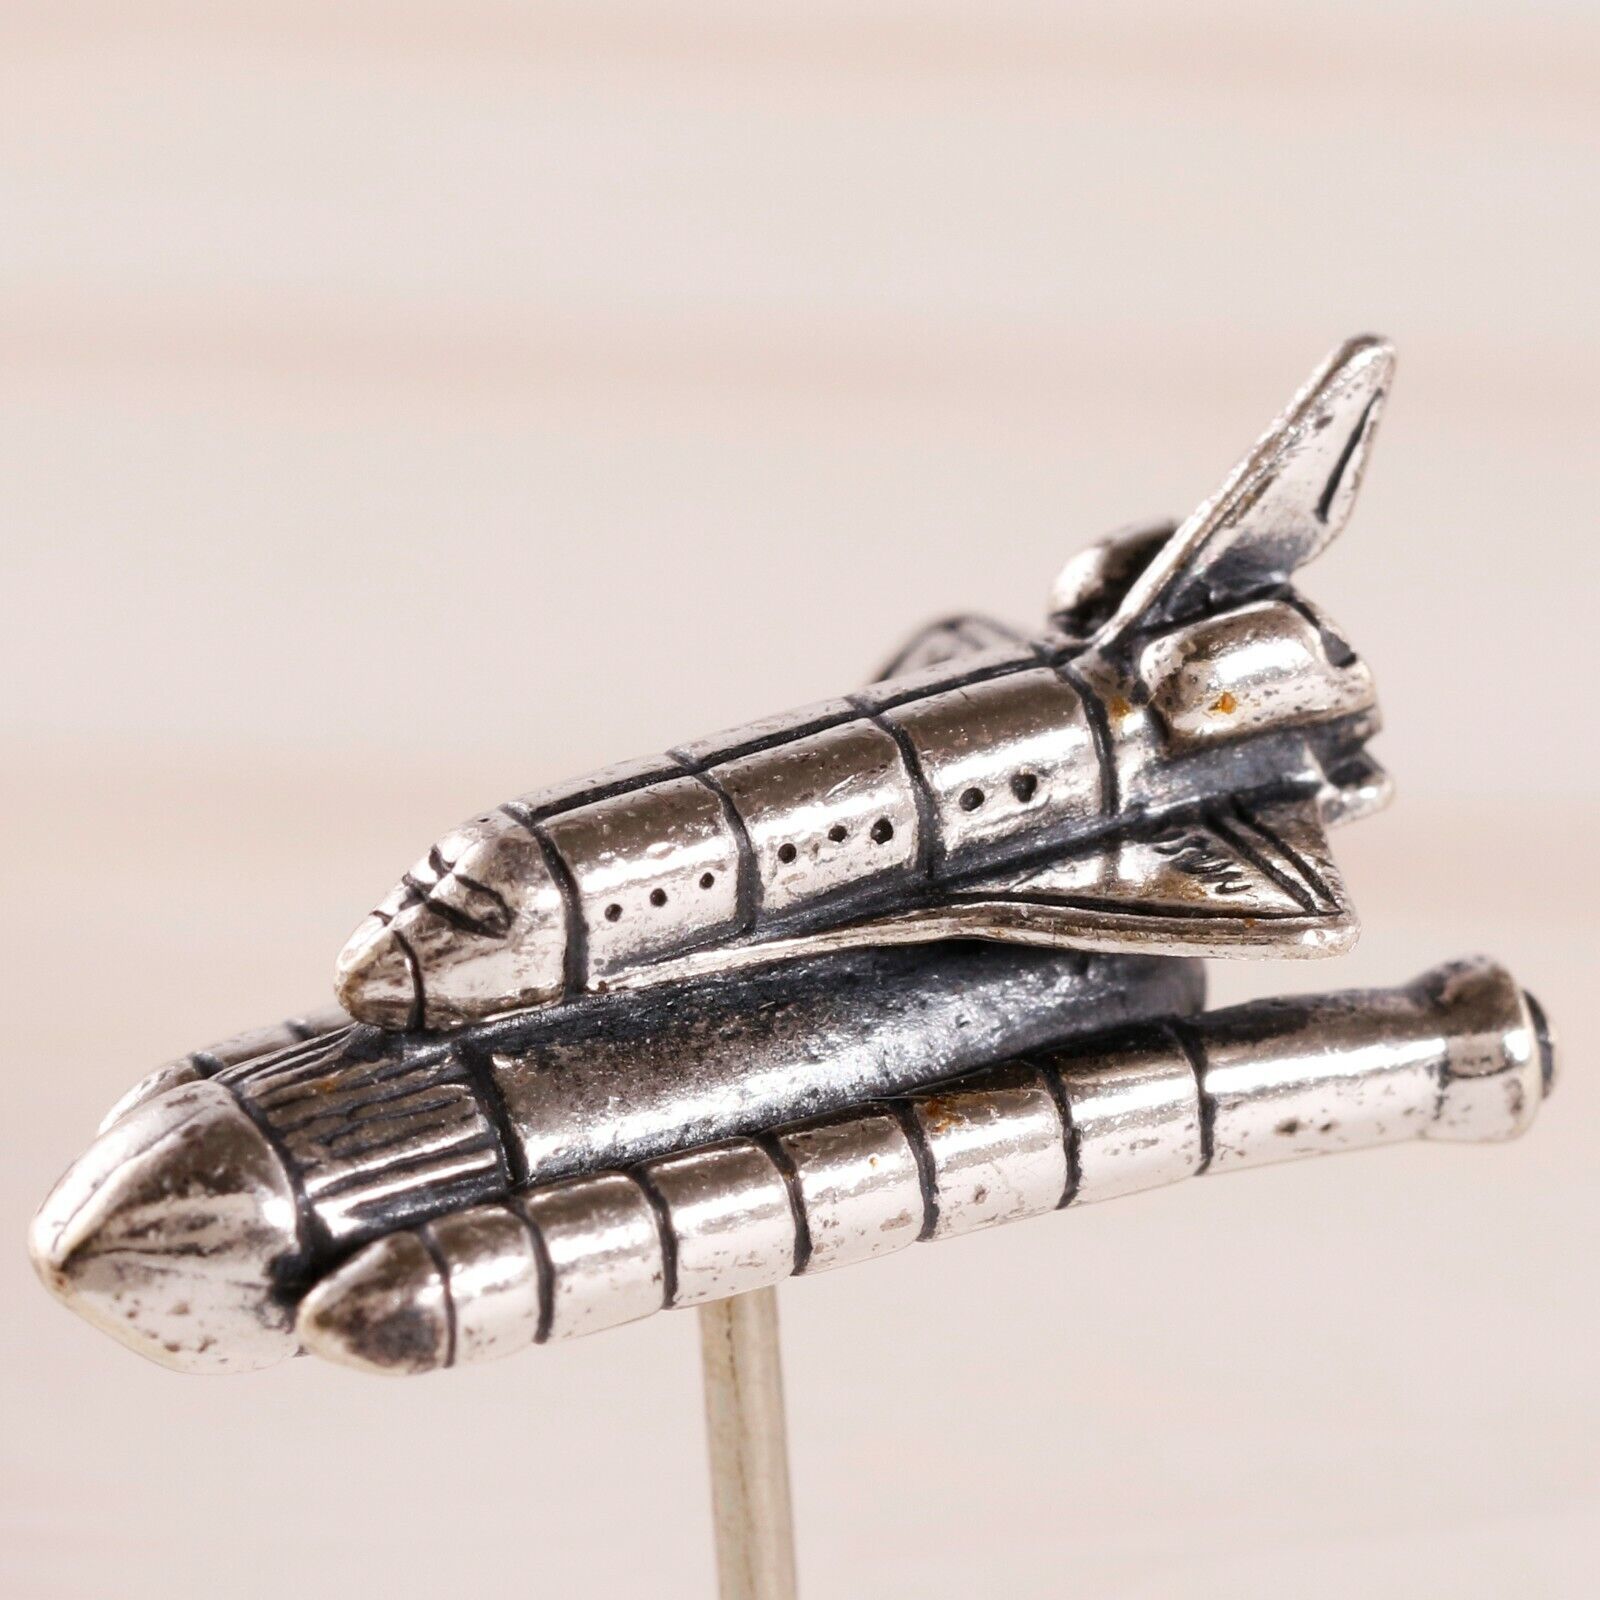 NASA USA STERLING SILVER SPACE SHUTTLE / SPACESHIP LAPEL PIN TIE TACK 